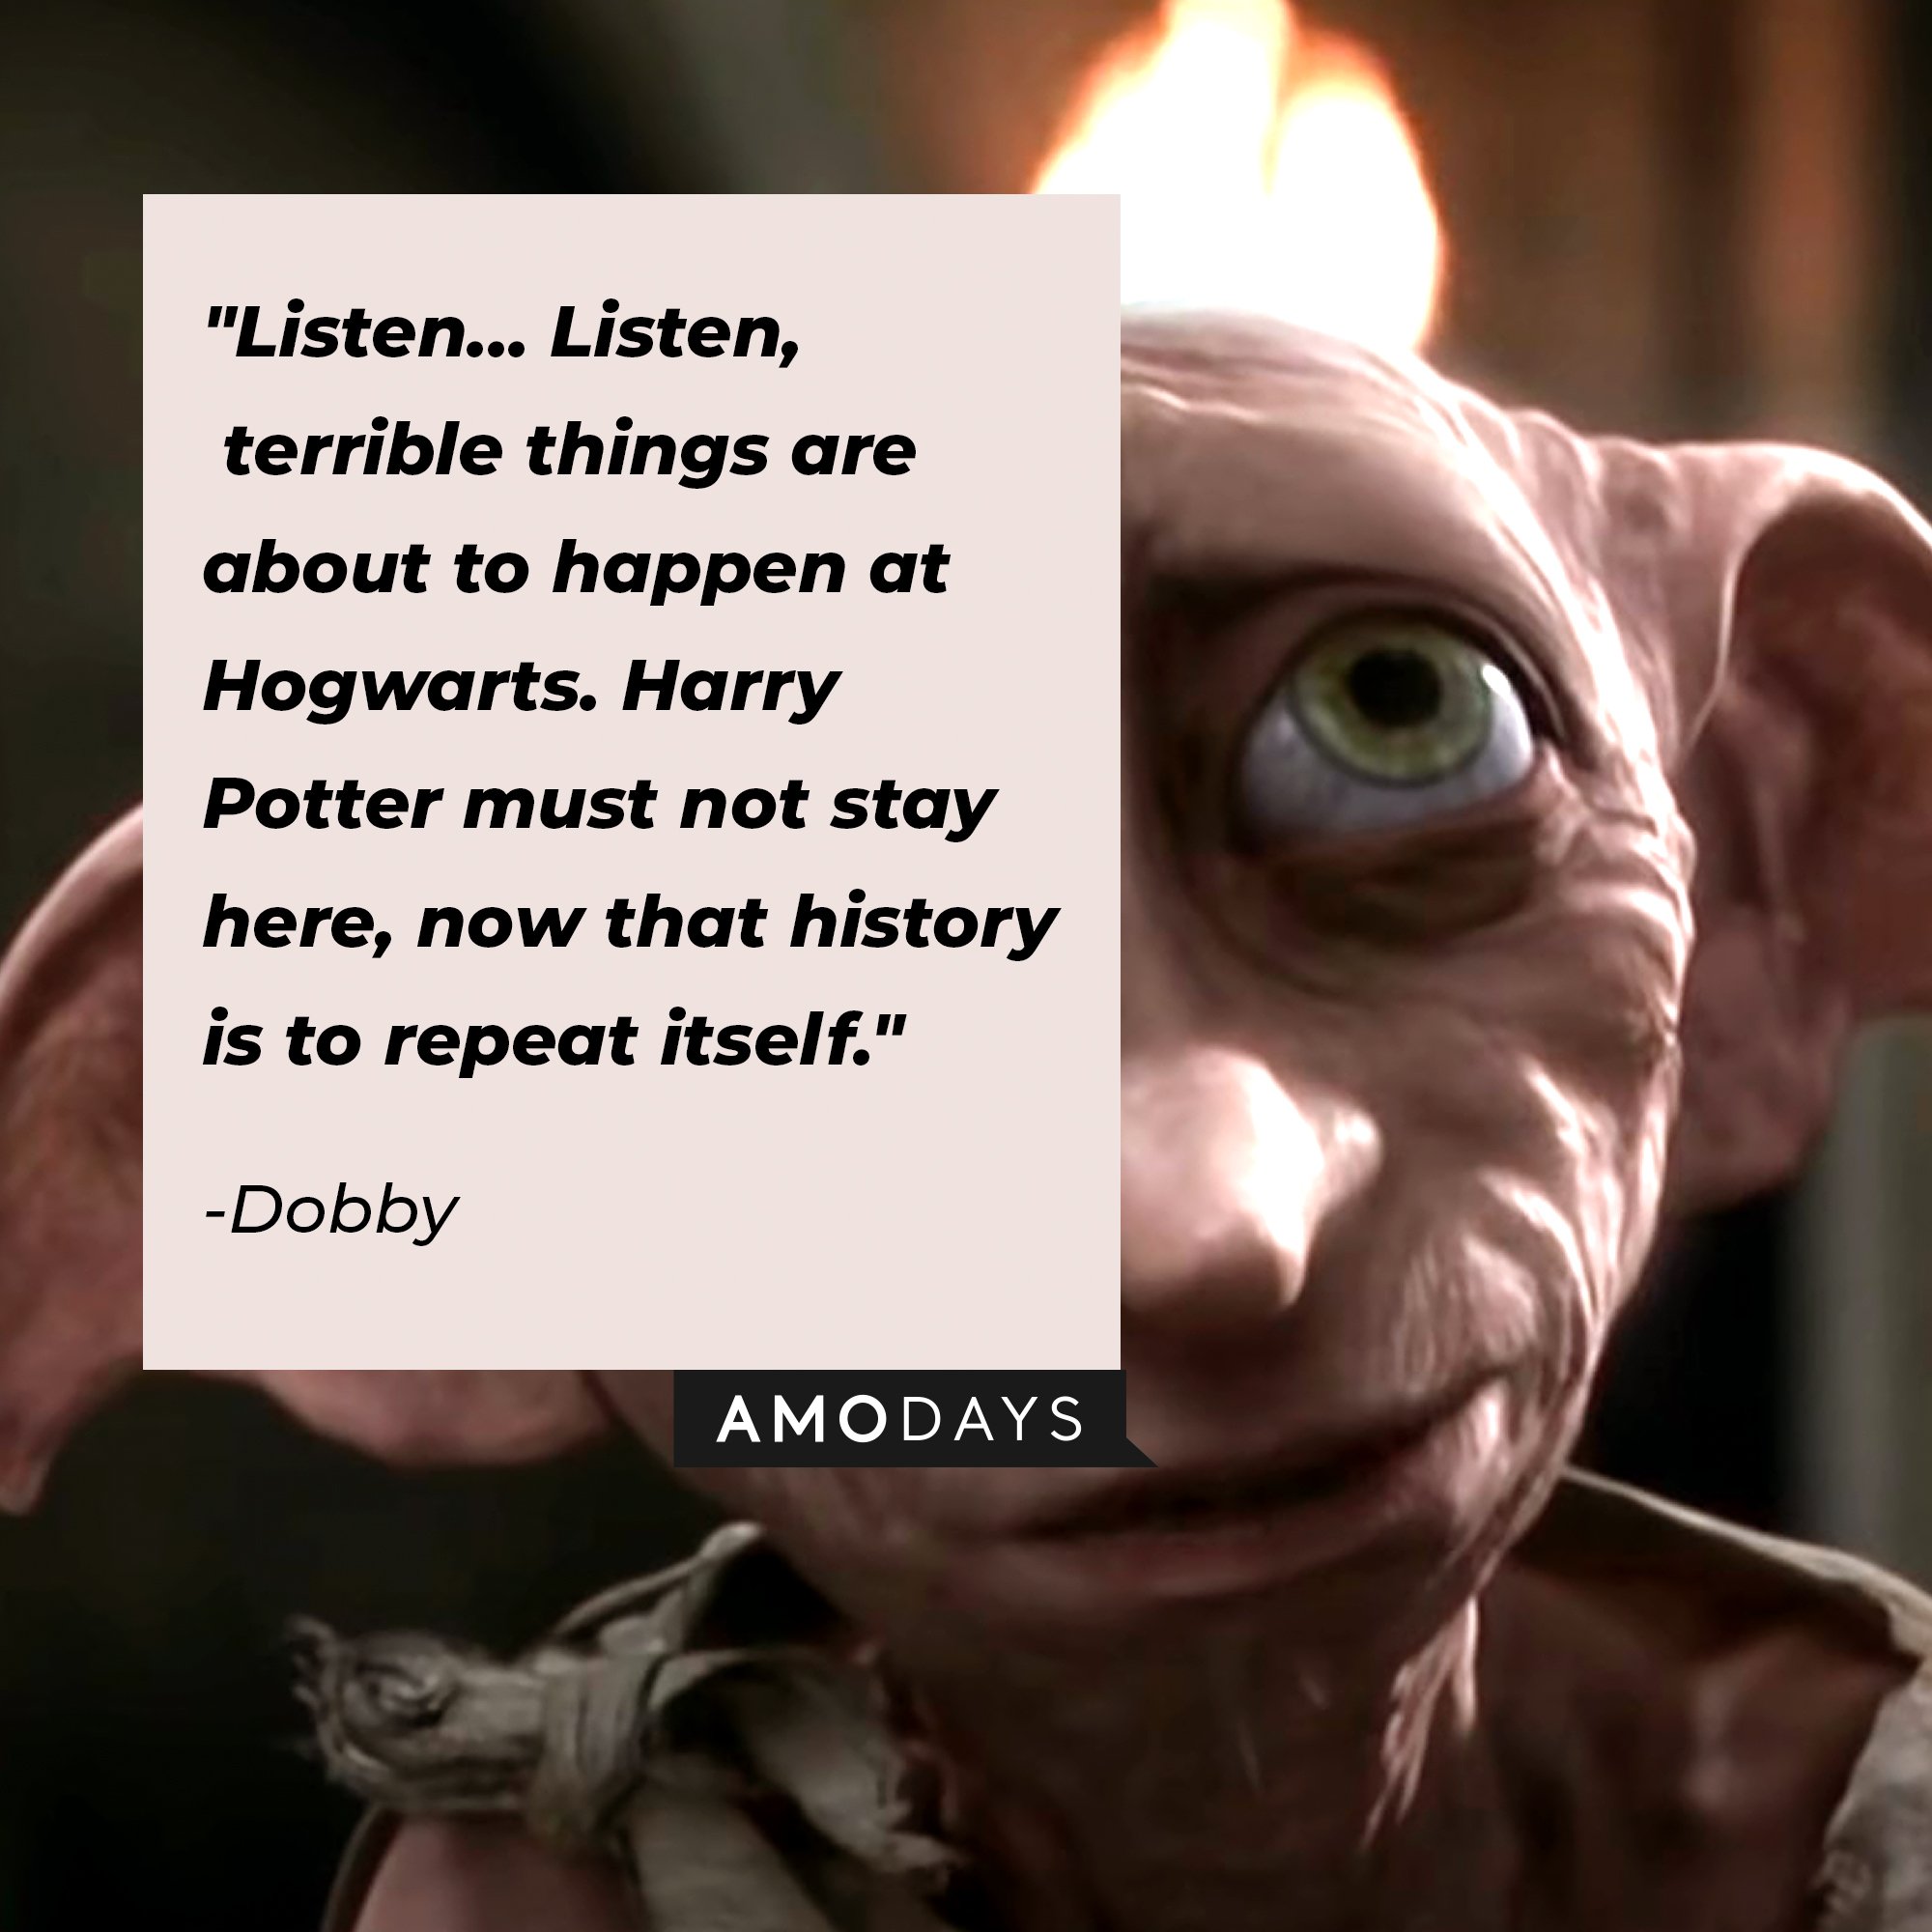 Dobby’s quote: "Listen… Listen, terrible things are about to happen at Hogwarts. Harry Potter must not stay here, now that history is to repeat itself." | Image: AmoDays